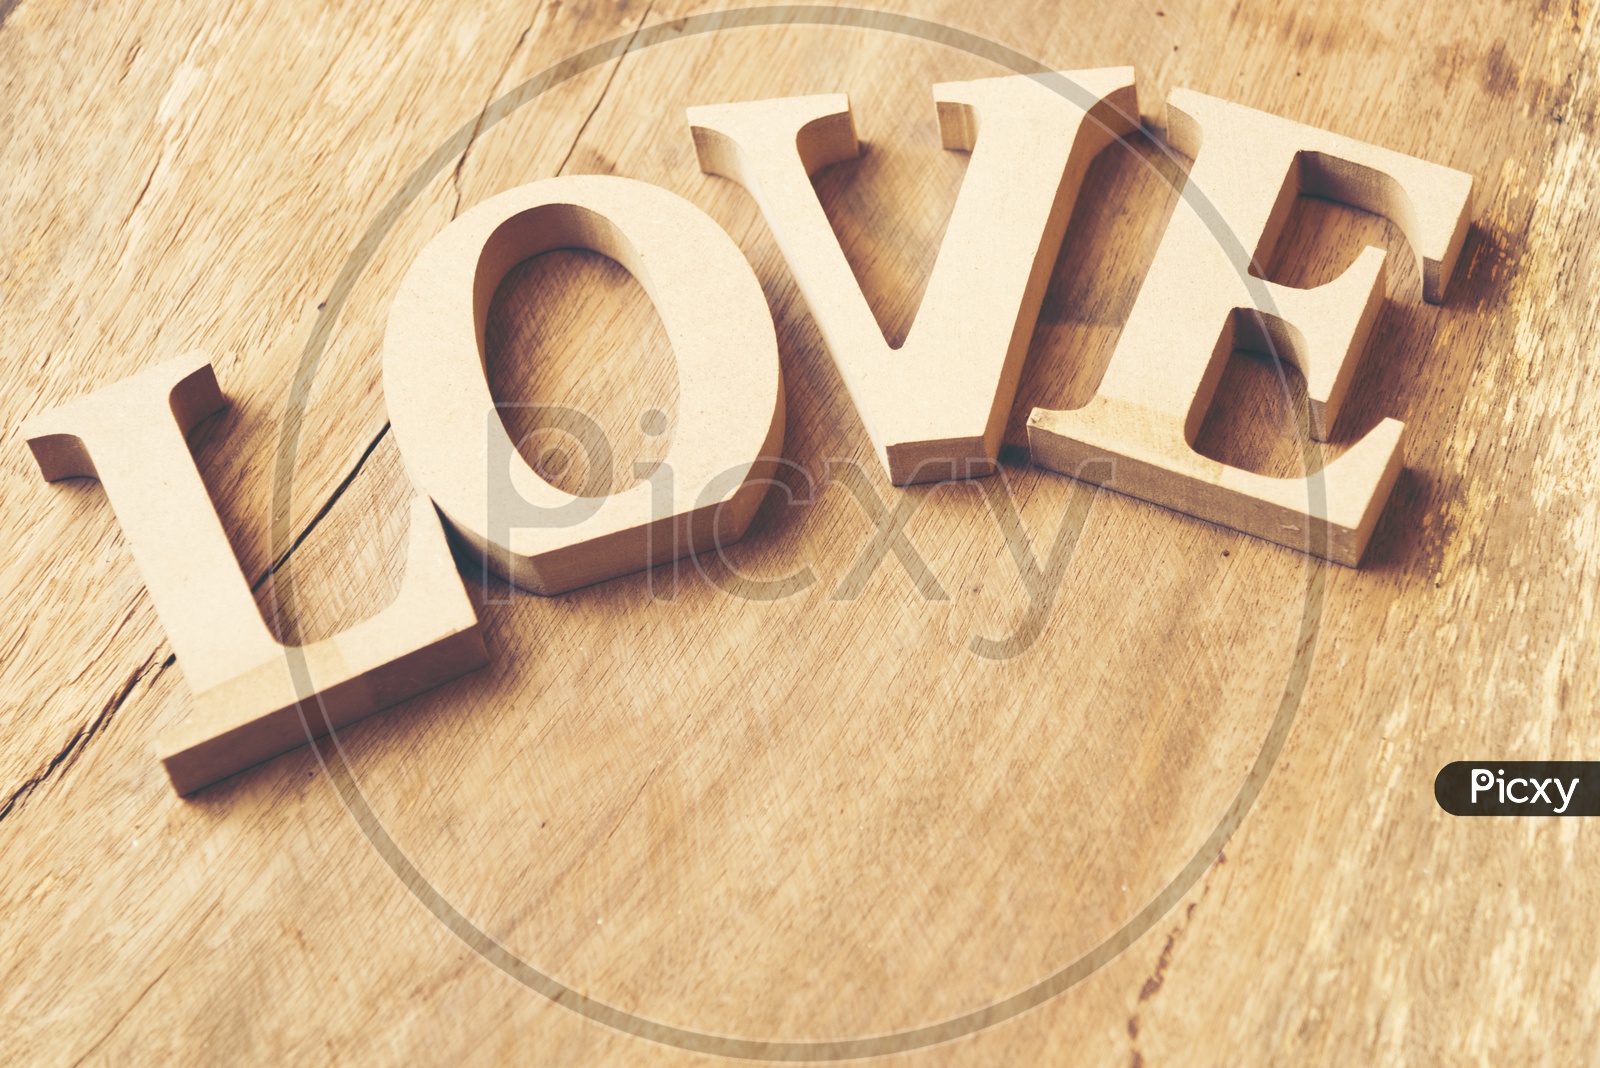 Wooden letters forming word LOVE on the table